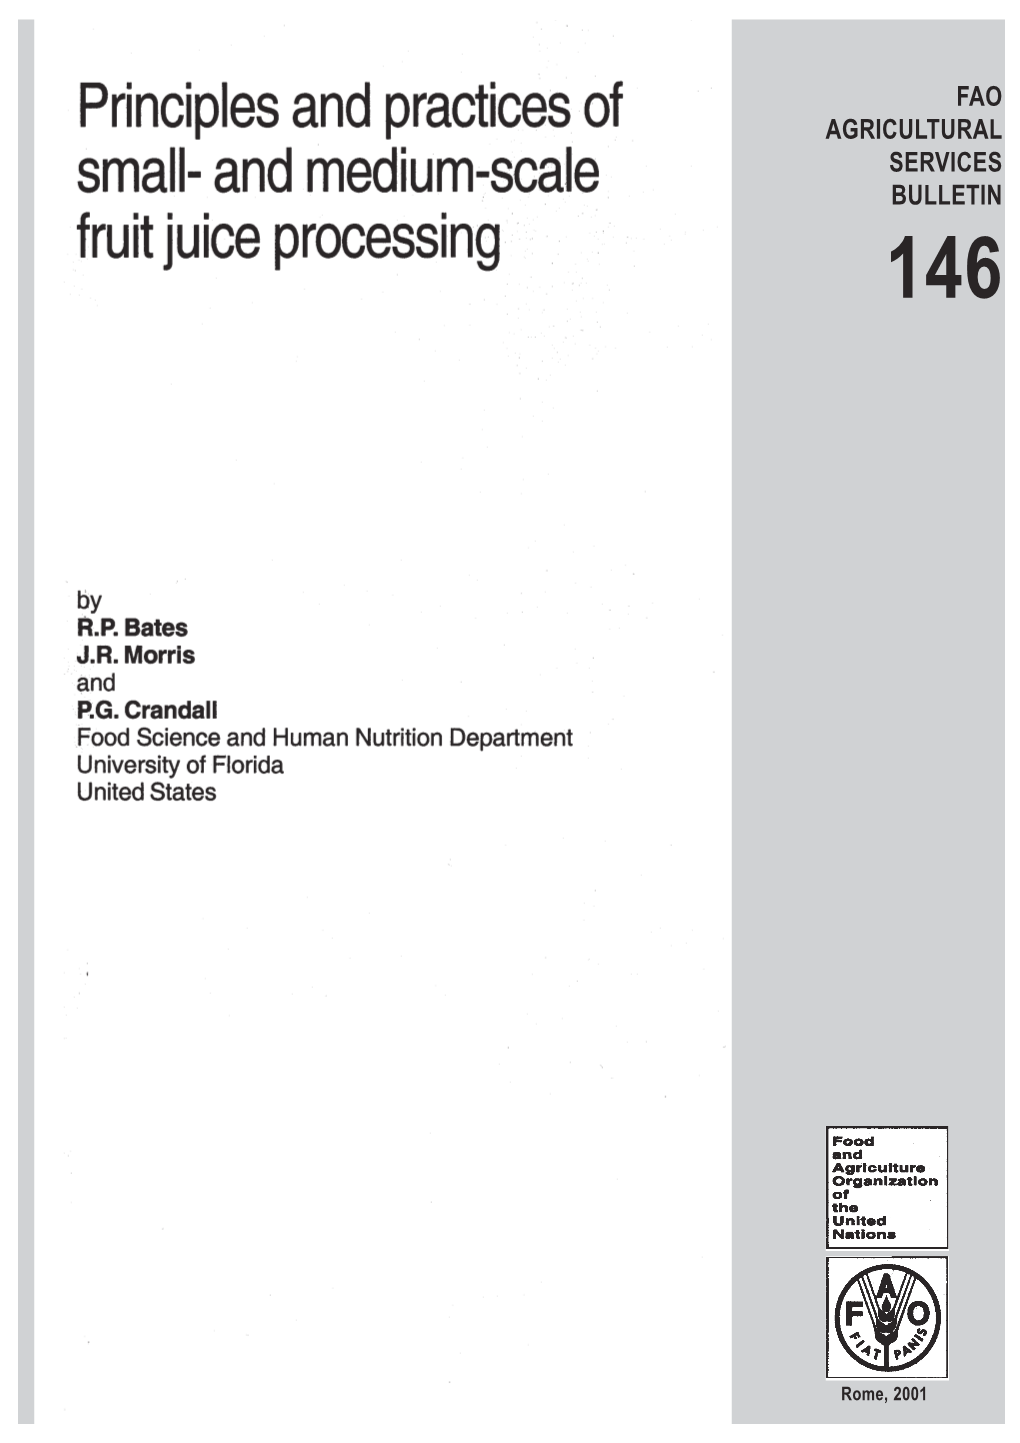 Principes and Practices of Small- and Medium-Scale Fruit Juice Processing